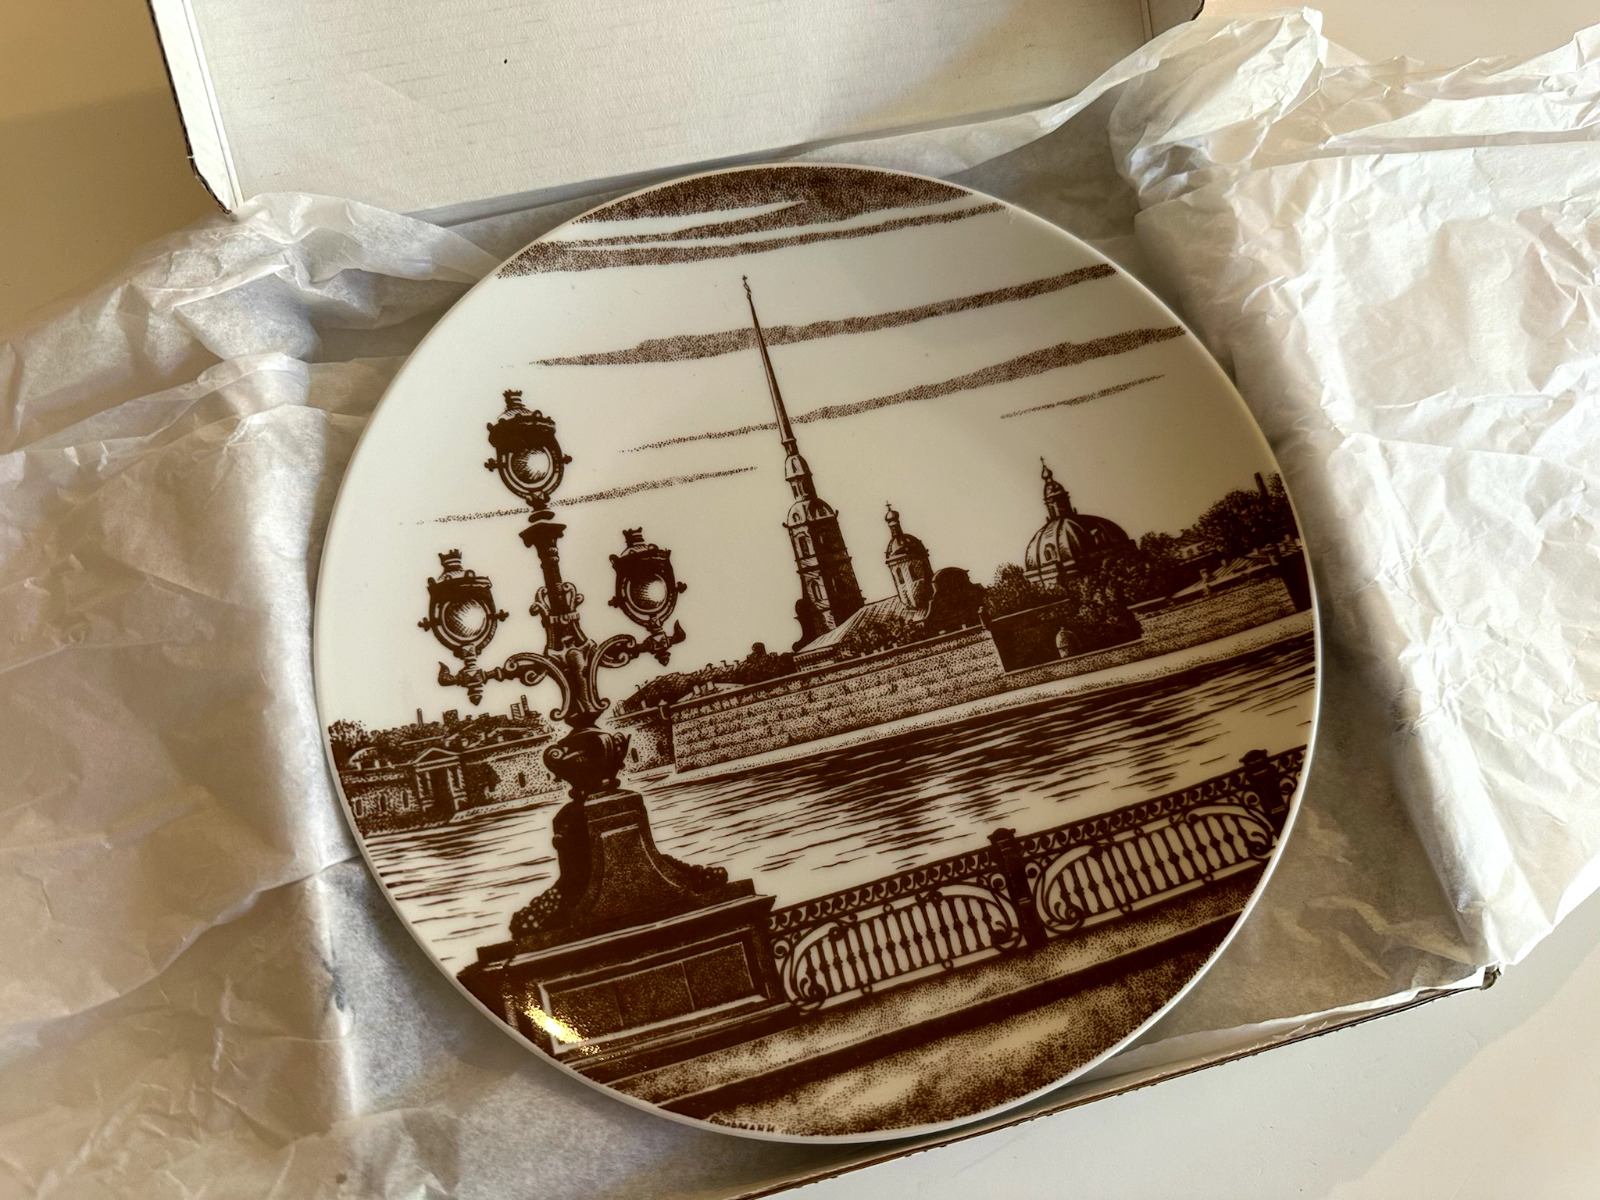 LIMITED EDITION Collectors Plate Imperial Porcelain 1744 St. Petersburg